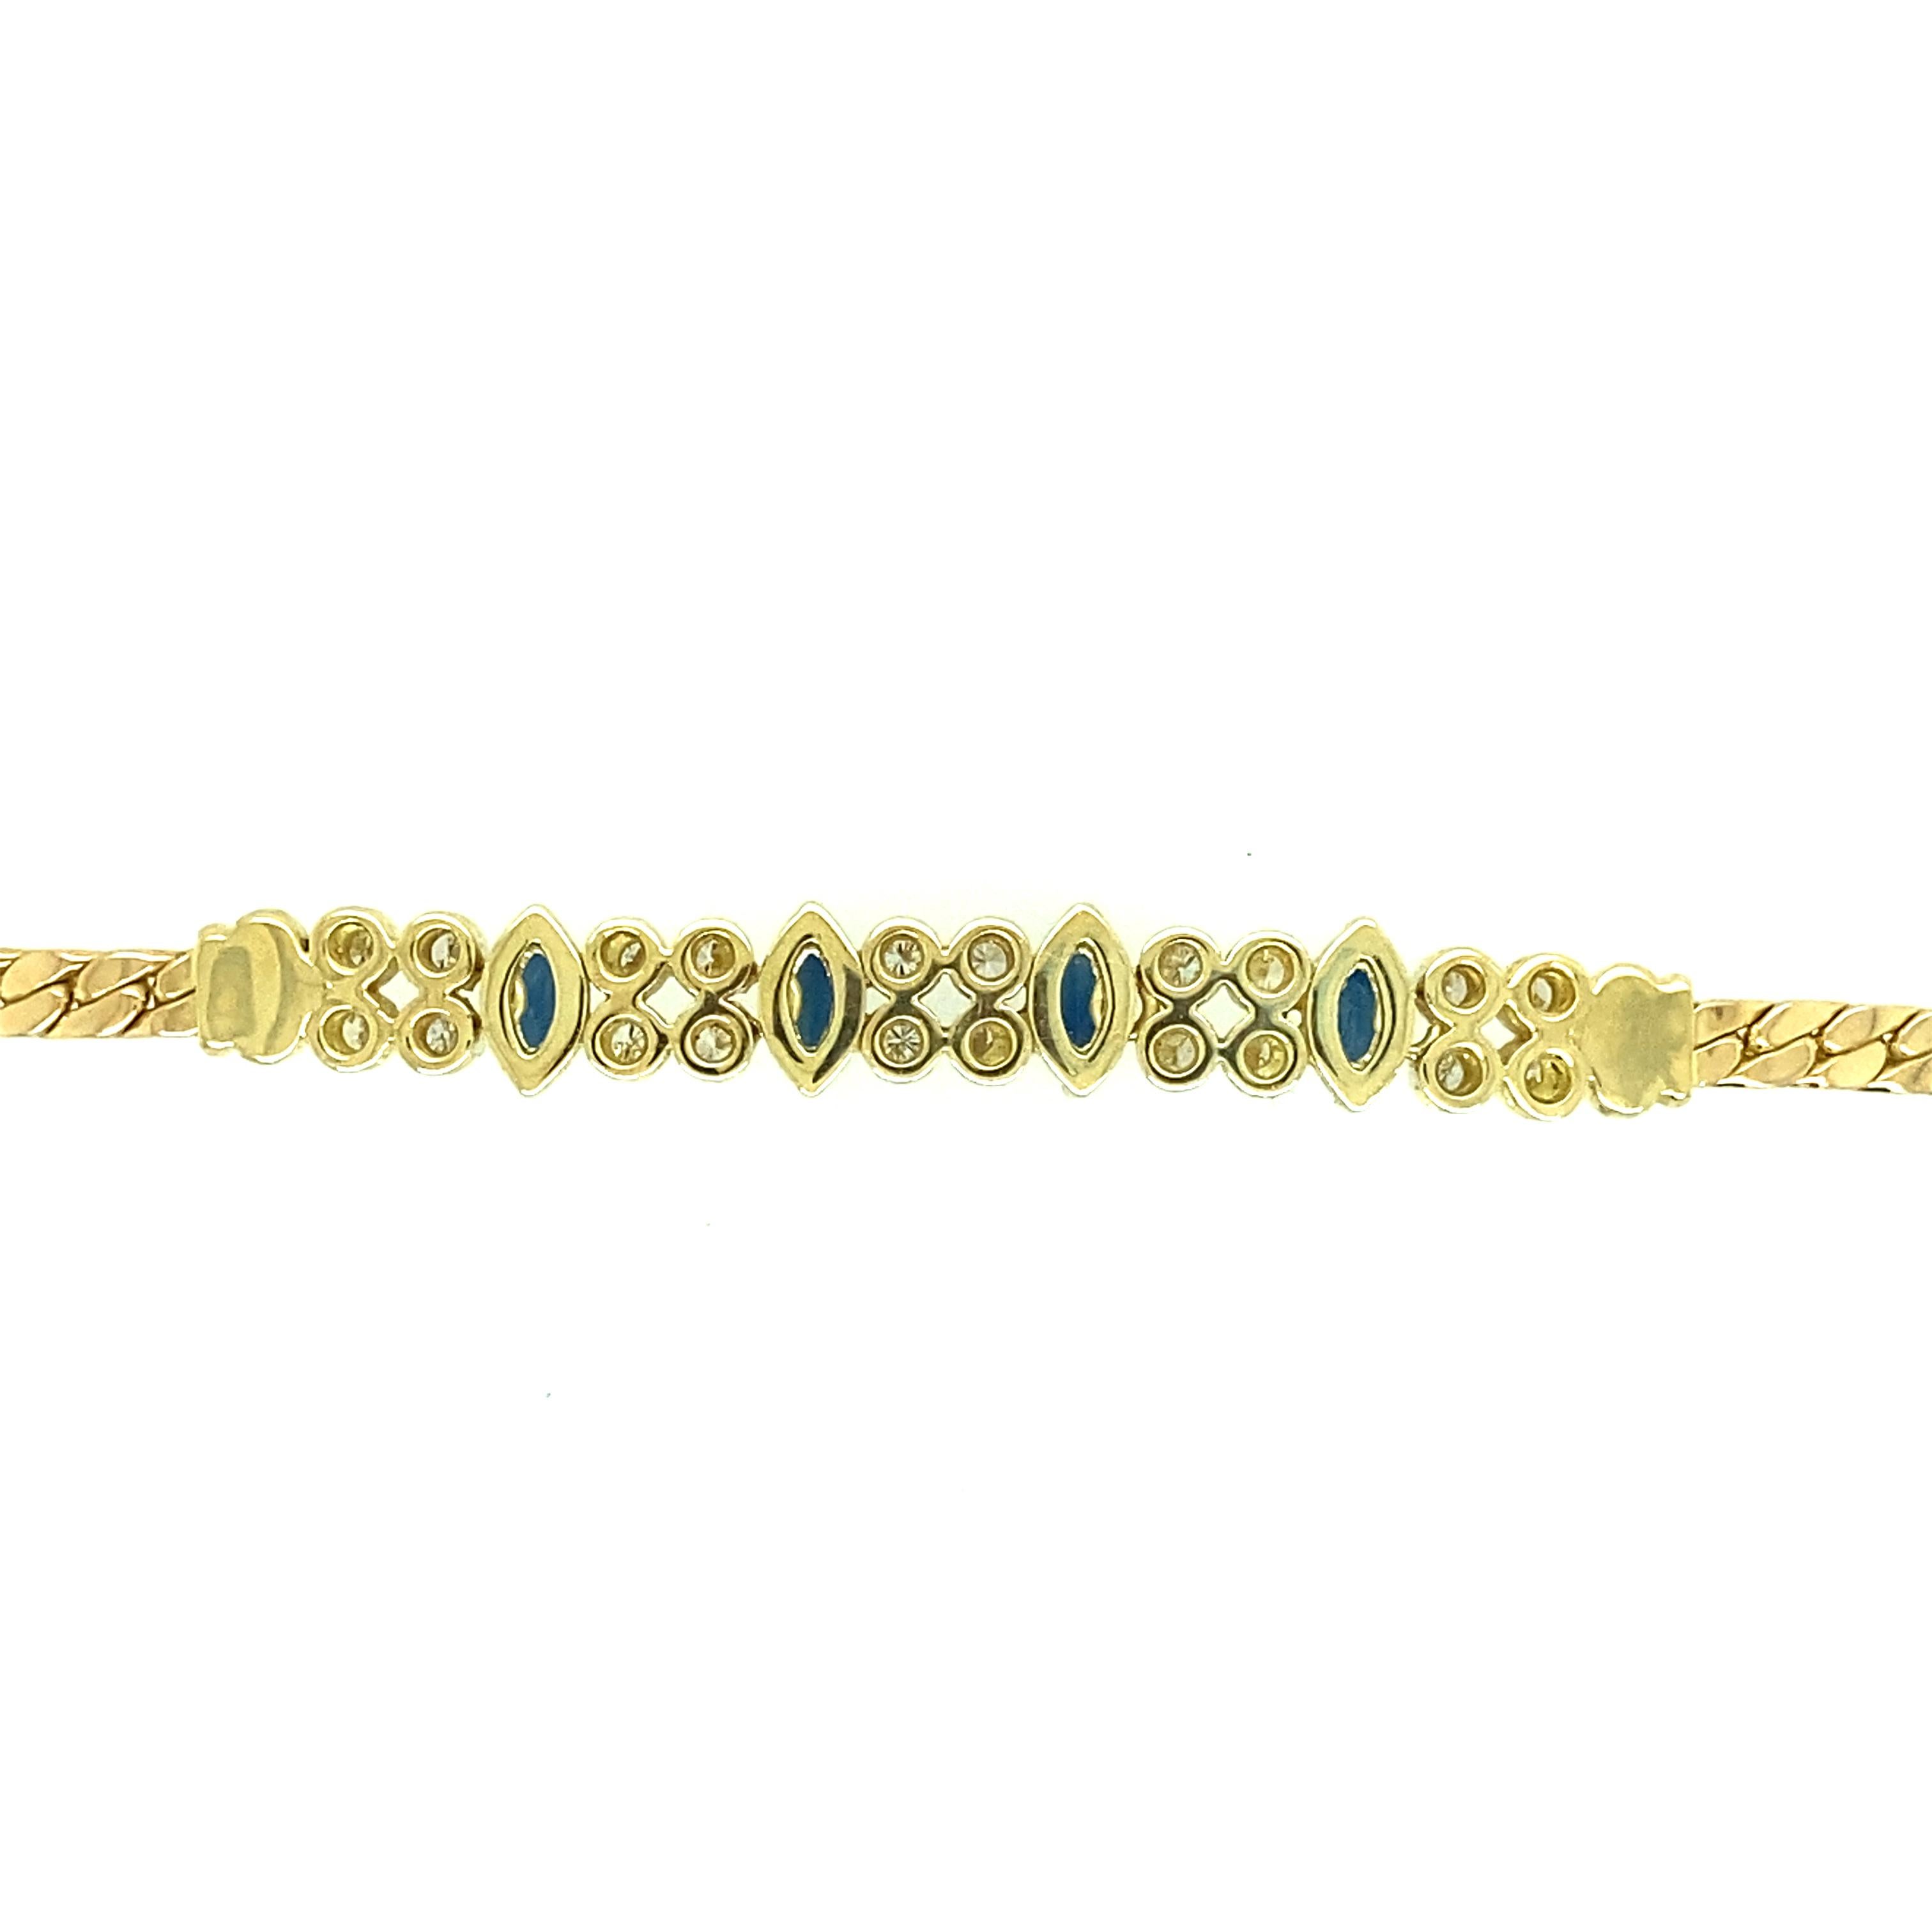 One 14 karat yellow gold ( stamped 750) curb link bracelet set with four 7.5x3mm natural blue marquise cut sapphires and twenty round brilliant cut diamonds with matching I/J color and SI clarity. The bracelet measures 7 inches long and is complete